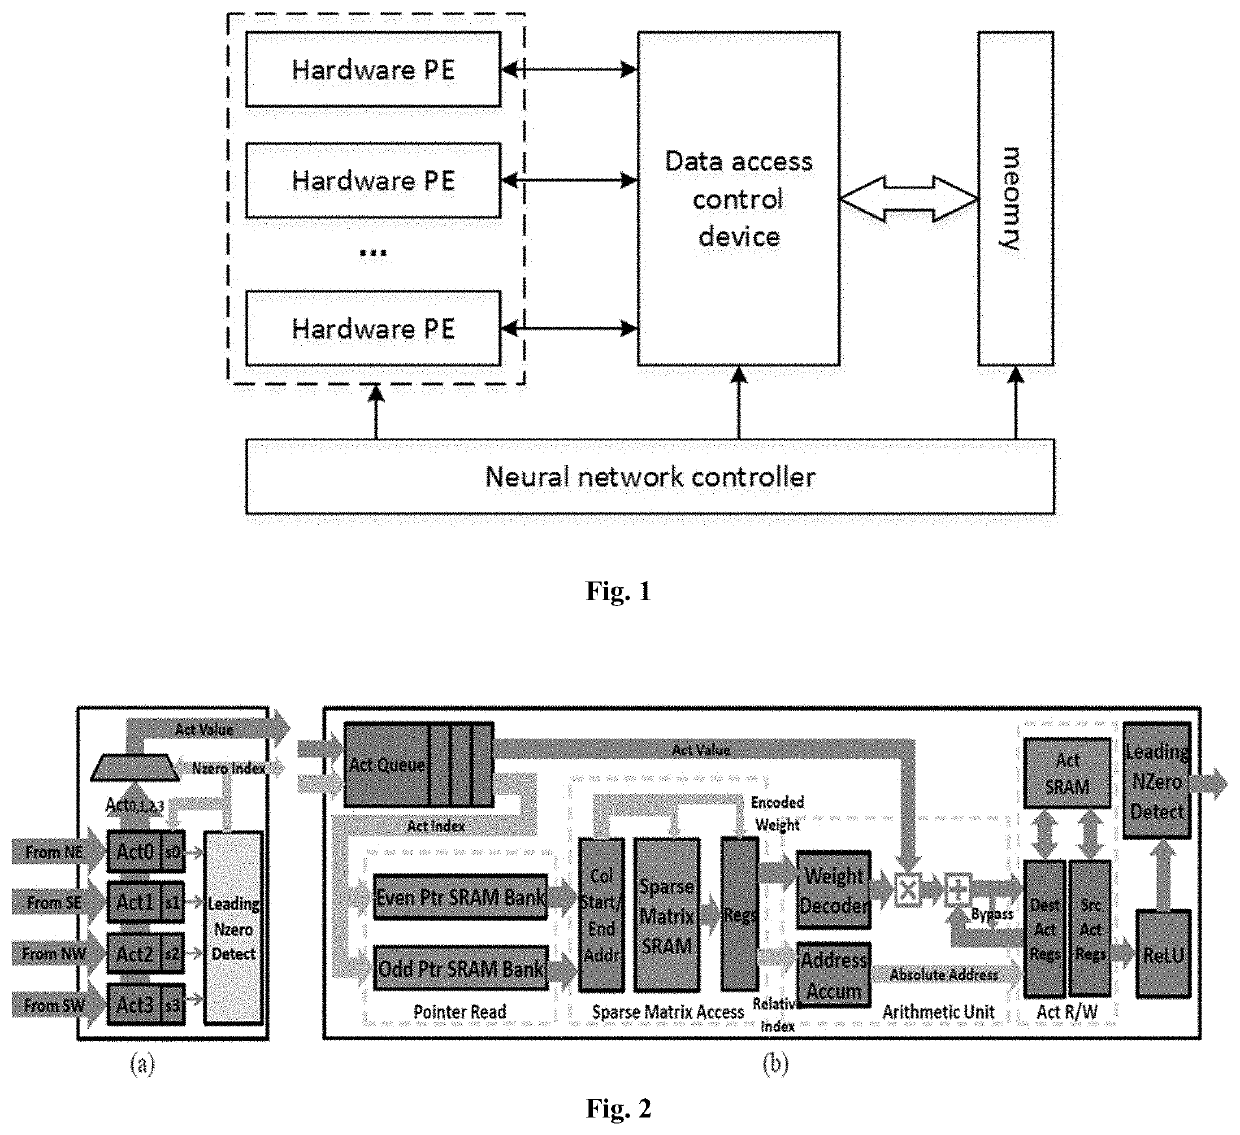 Efficient data access control device for neural network hardware acceleration system